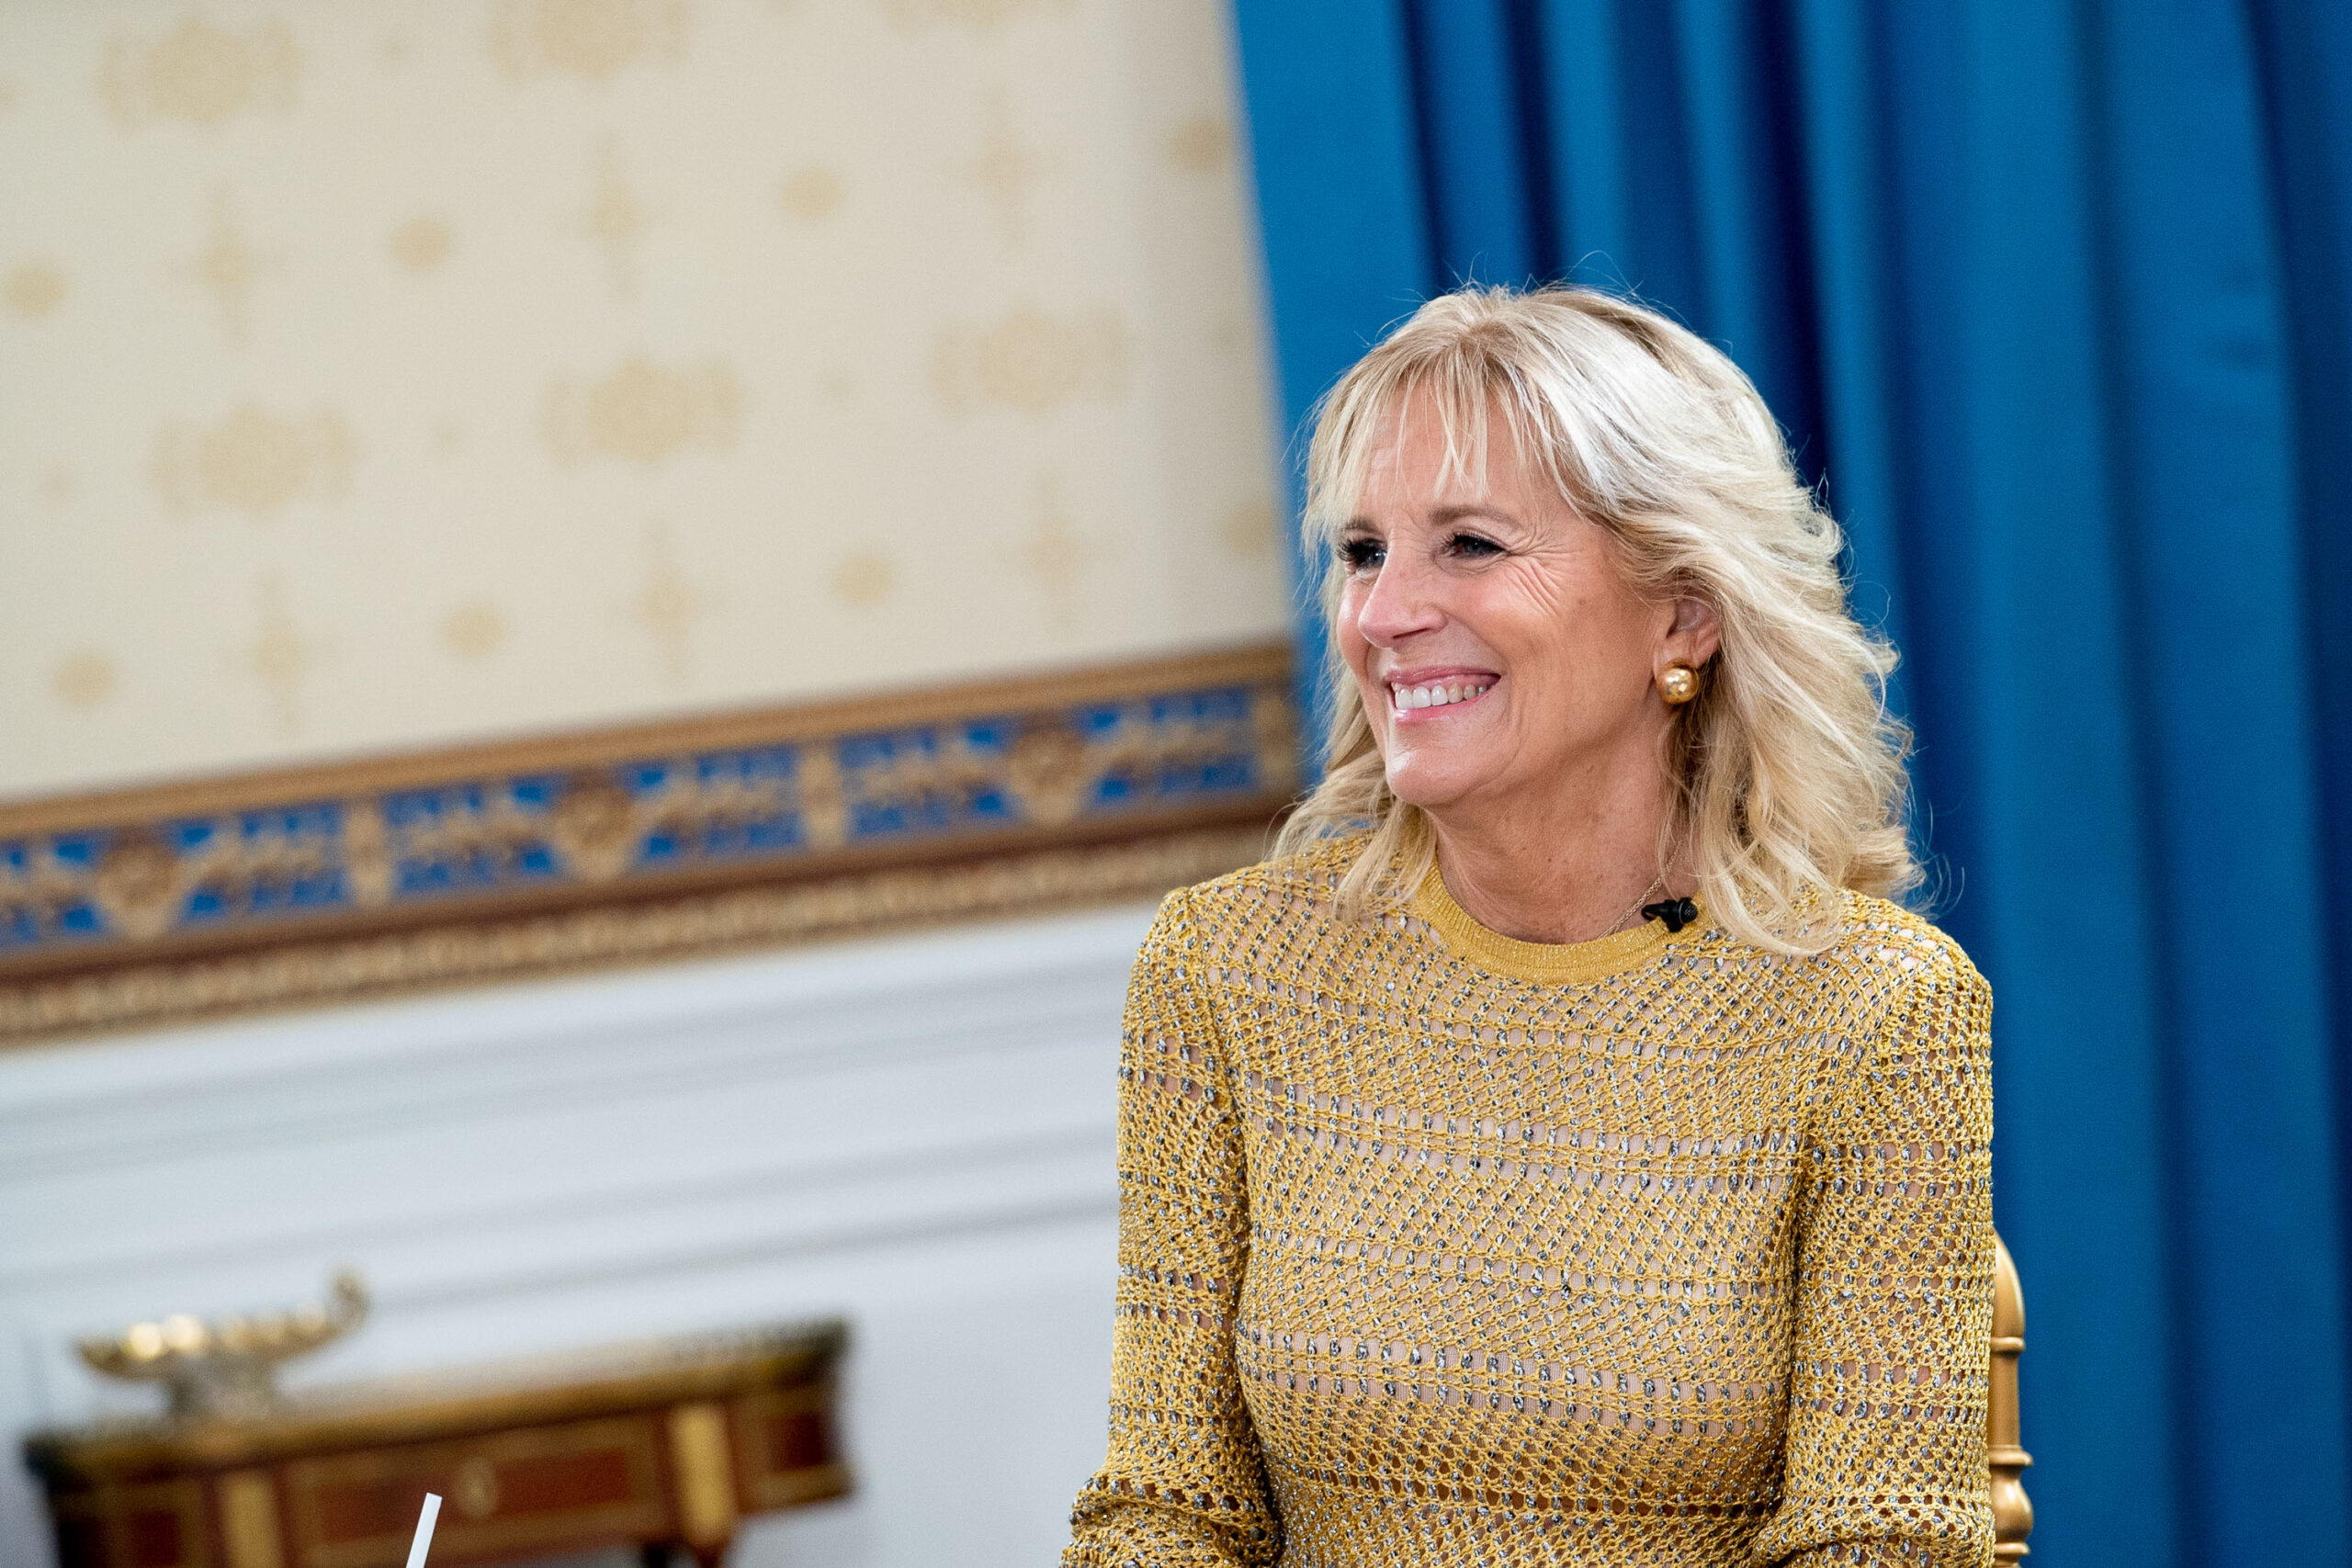 Jill Biden’s 0M Women’s Health Initiative can’t compensate for the harm caused by this administration